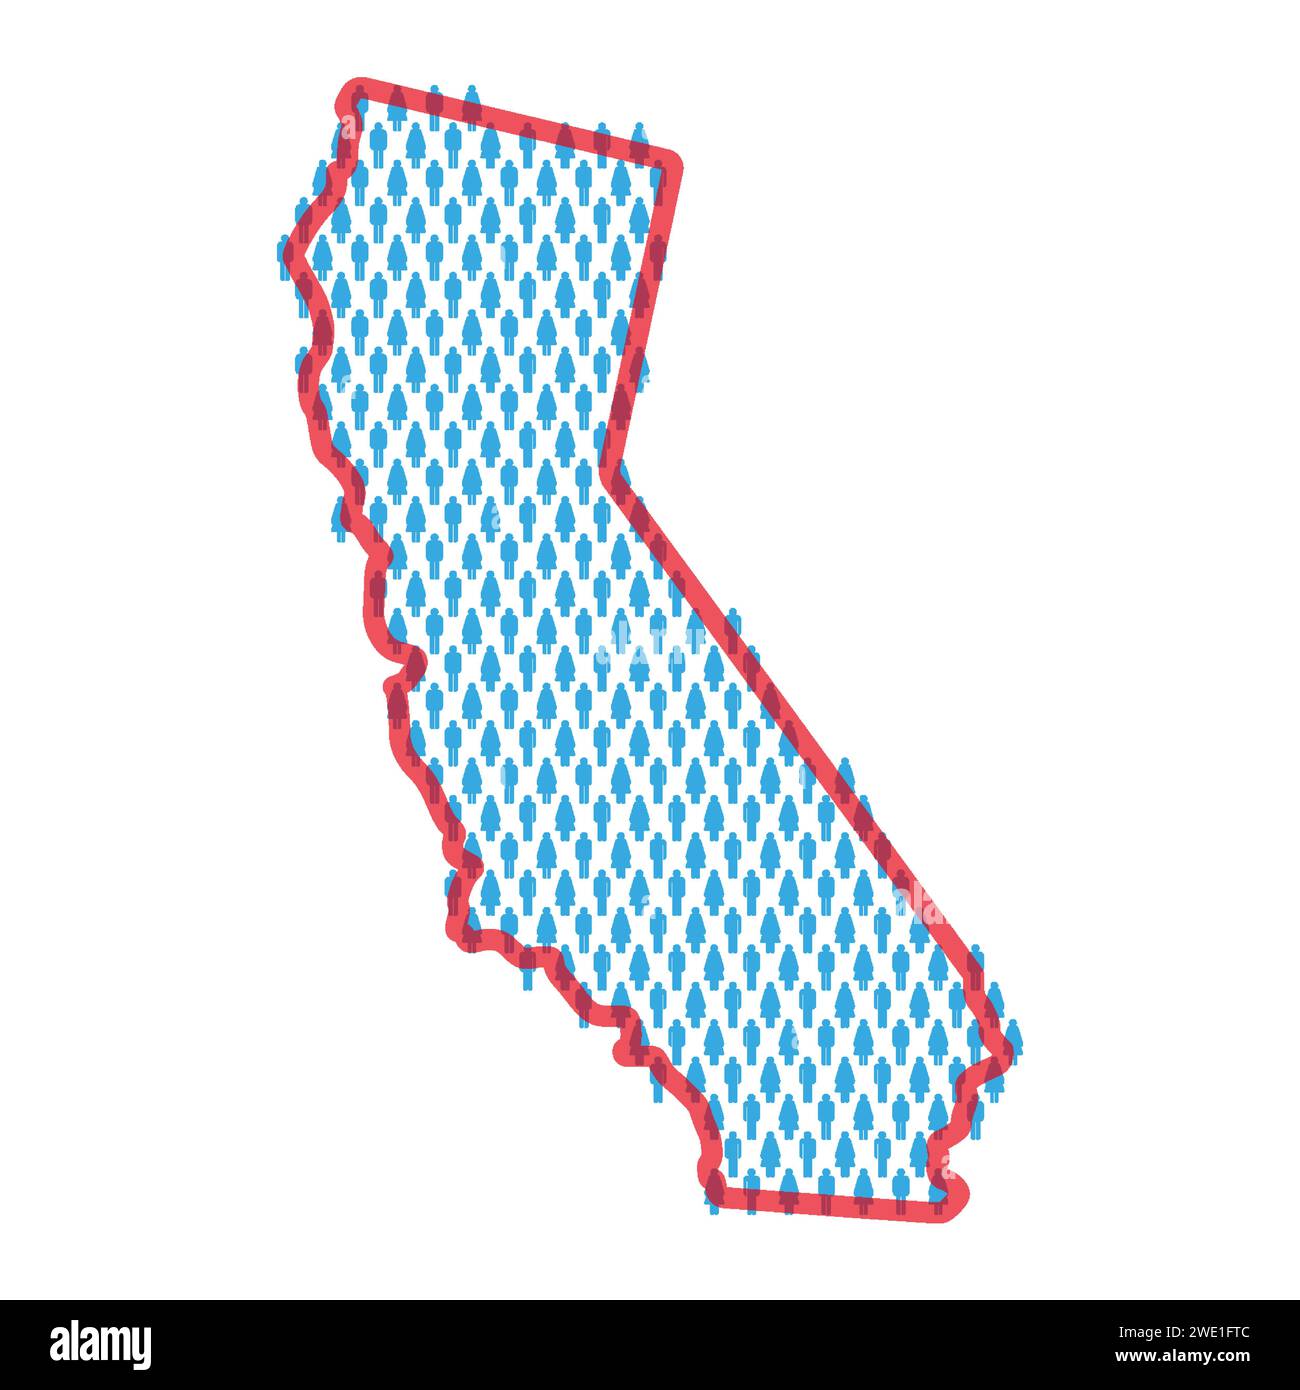 California population map. Stick figures people map with bold red translucent state border. Pattern of men and women icons. Isolated vector illustrati Stock Vector